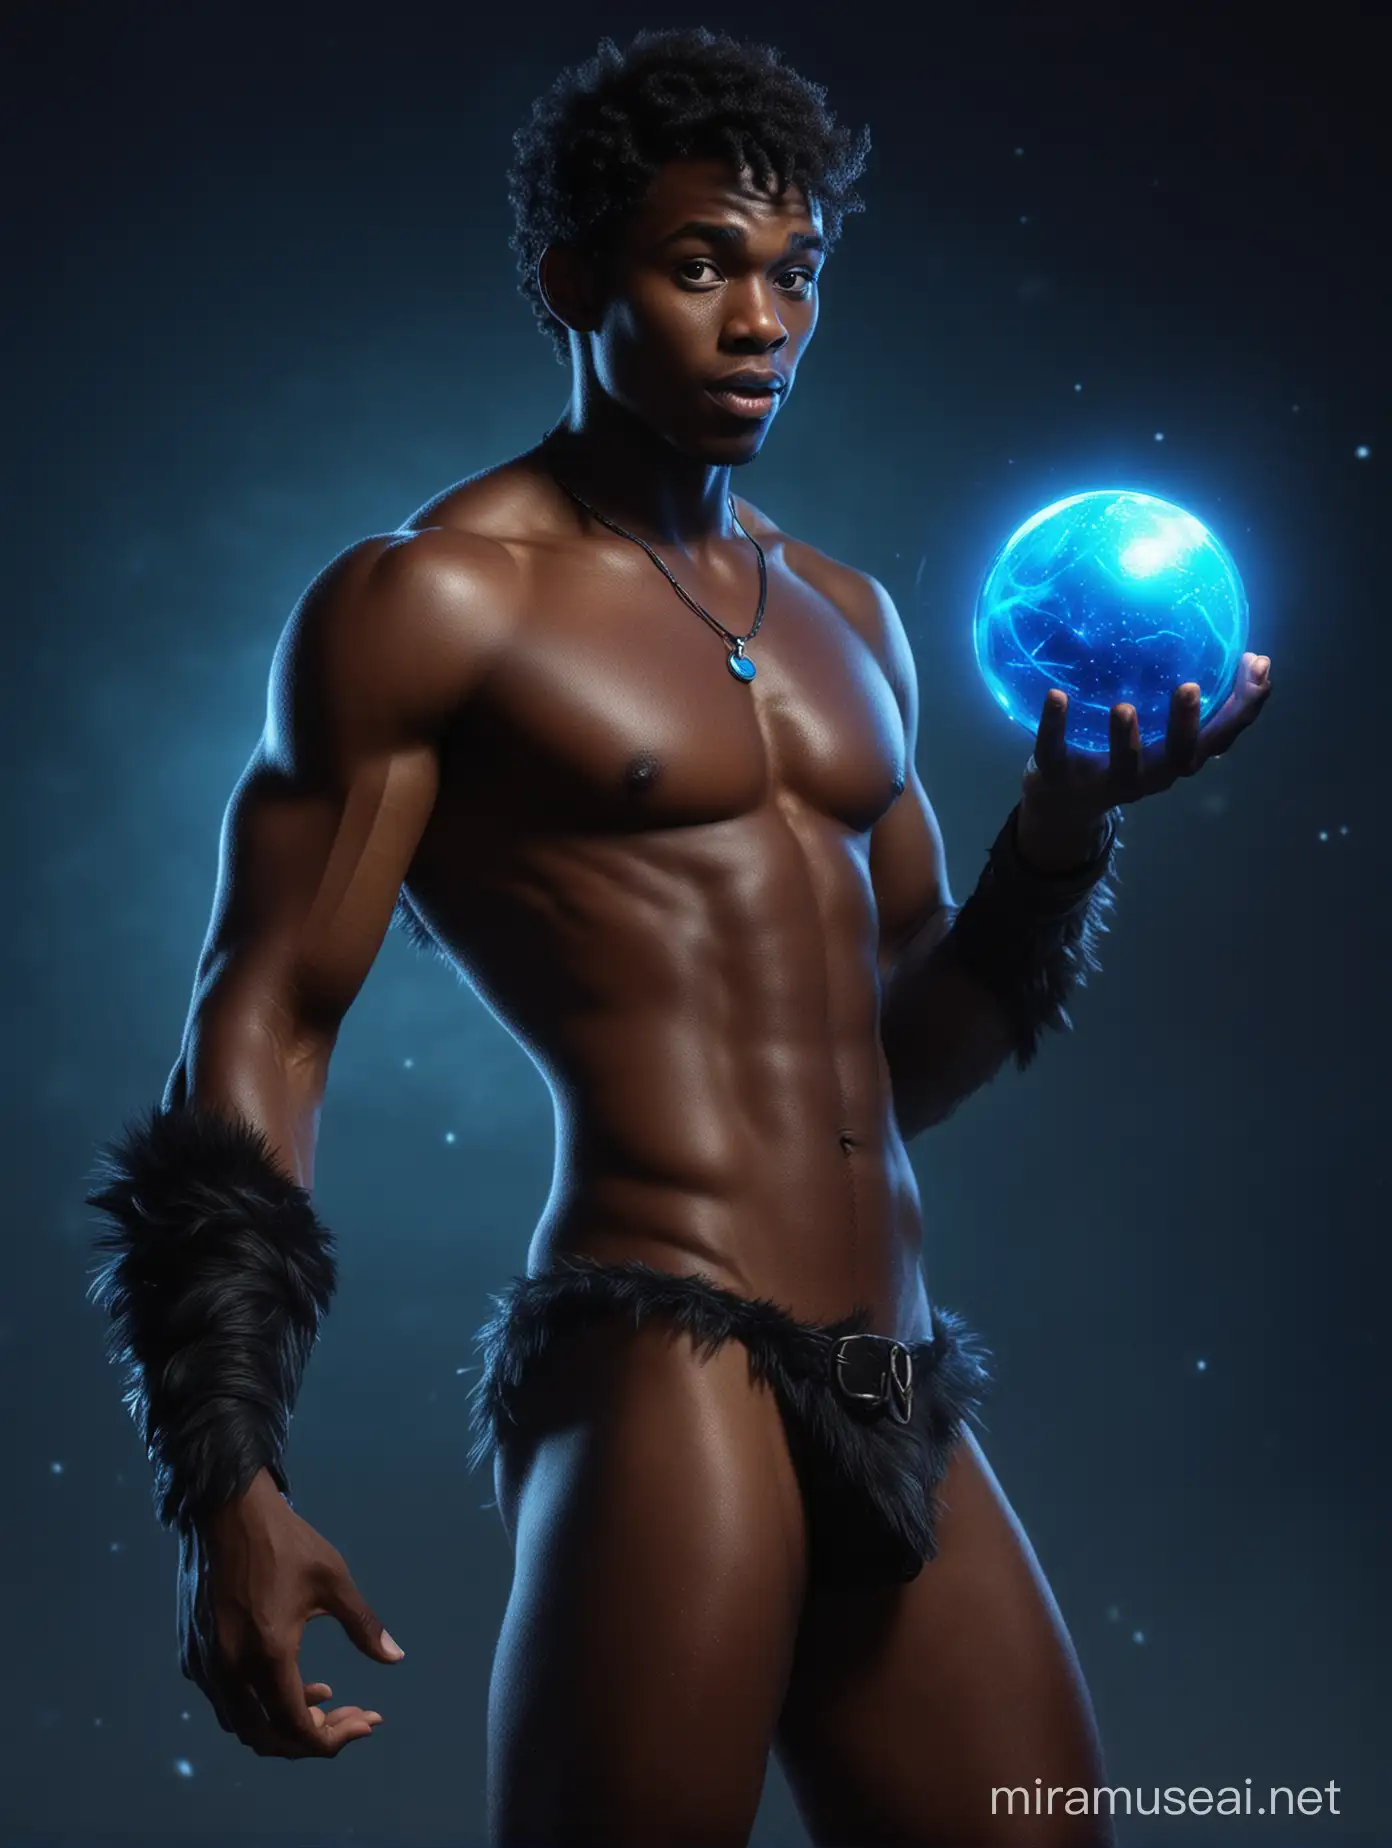 Muscular Shirtless Black Peter Pan Flying with Blue Orb in Neon Night Sky